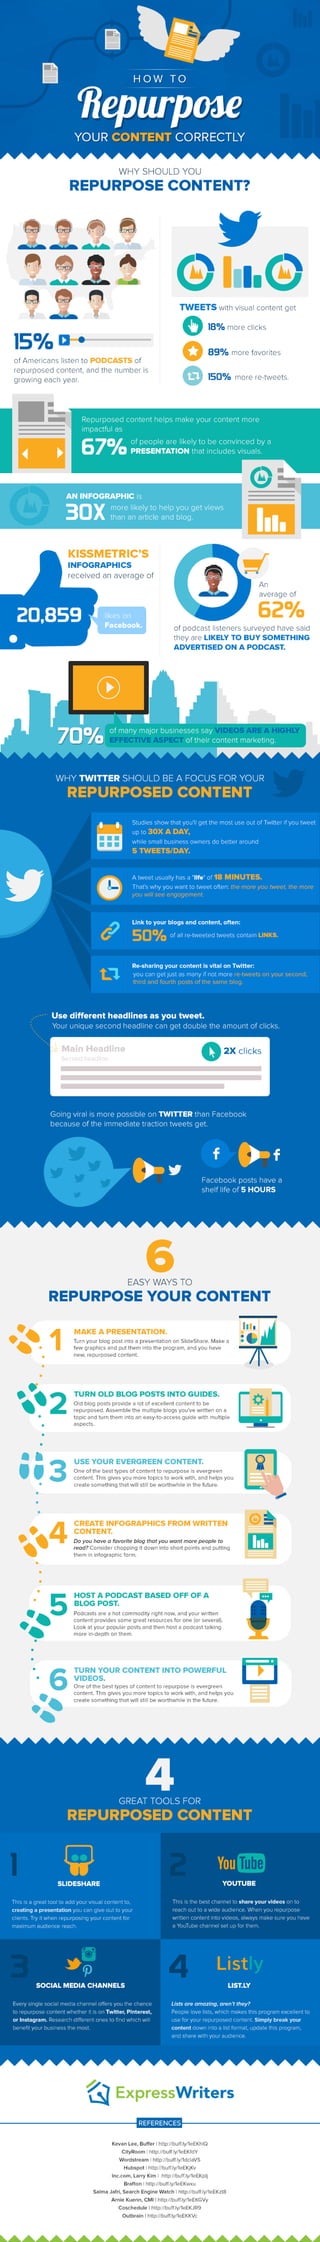 How To Repurpose Your Content Correctly (Infographic)